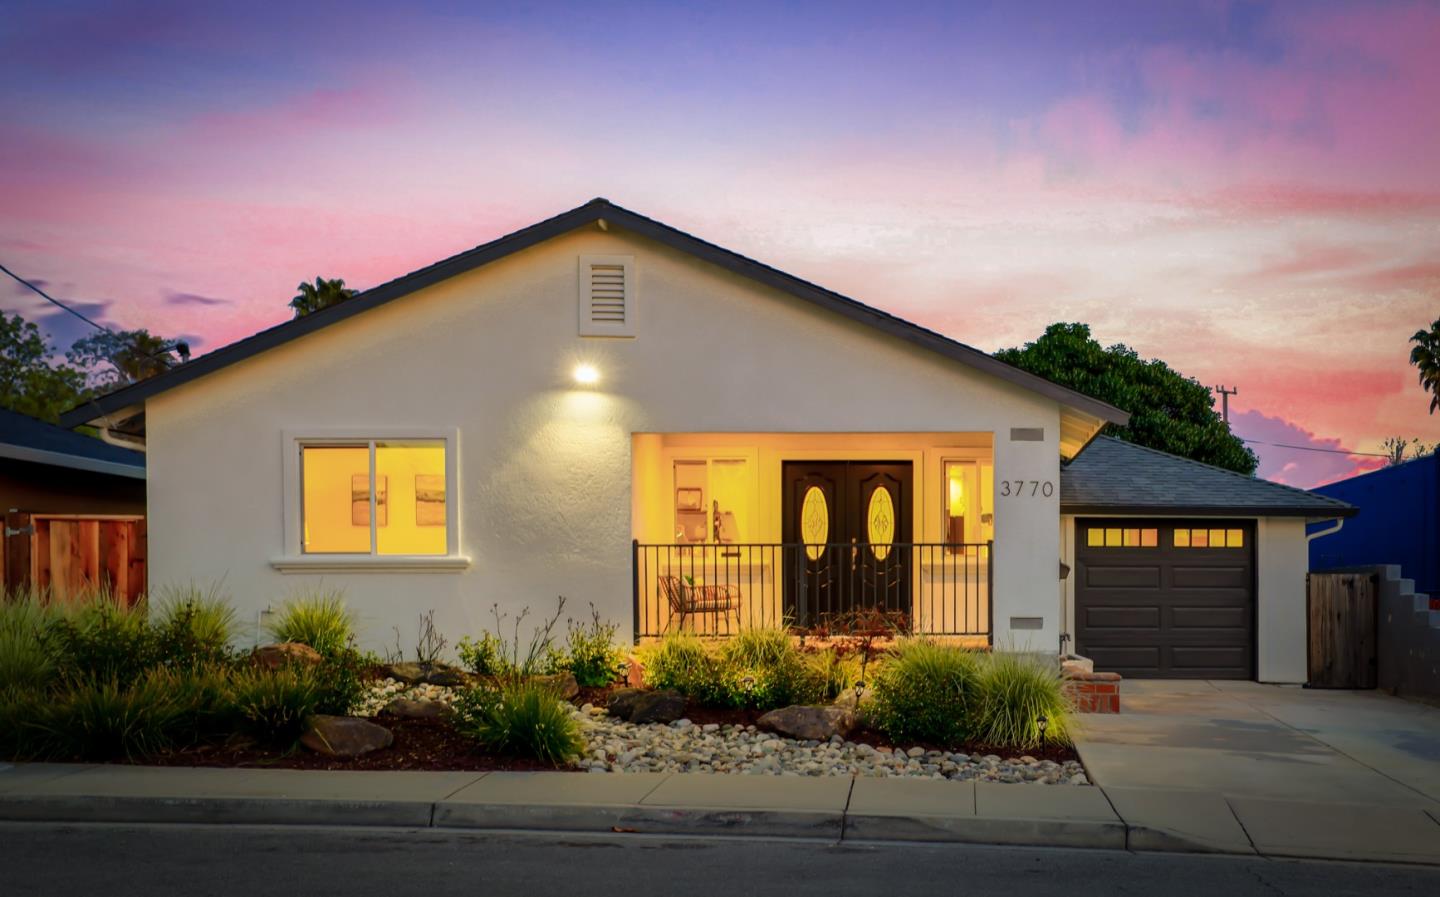 Photo of 3770 Union St in Fremont, CA